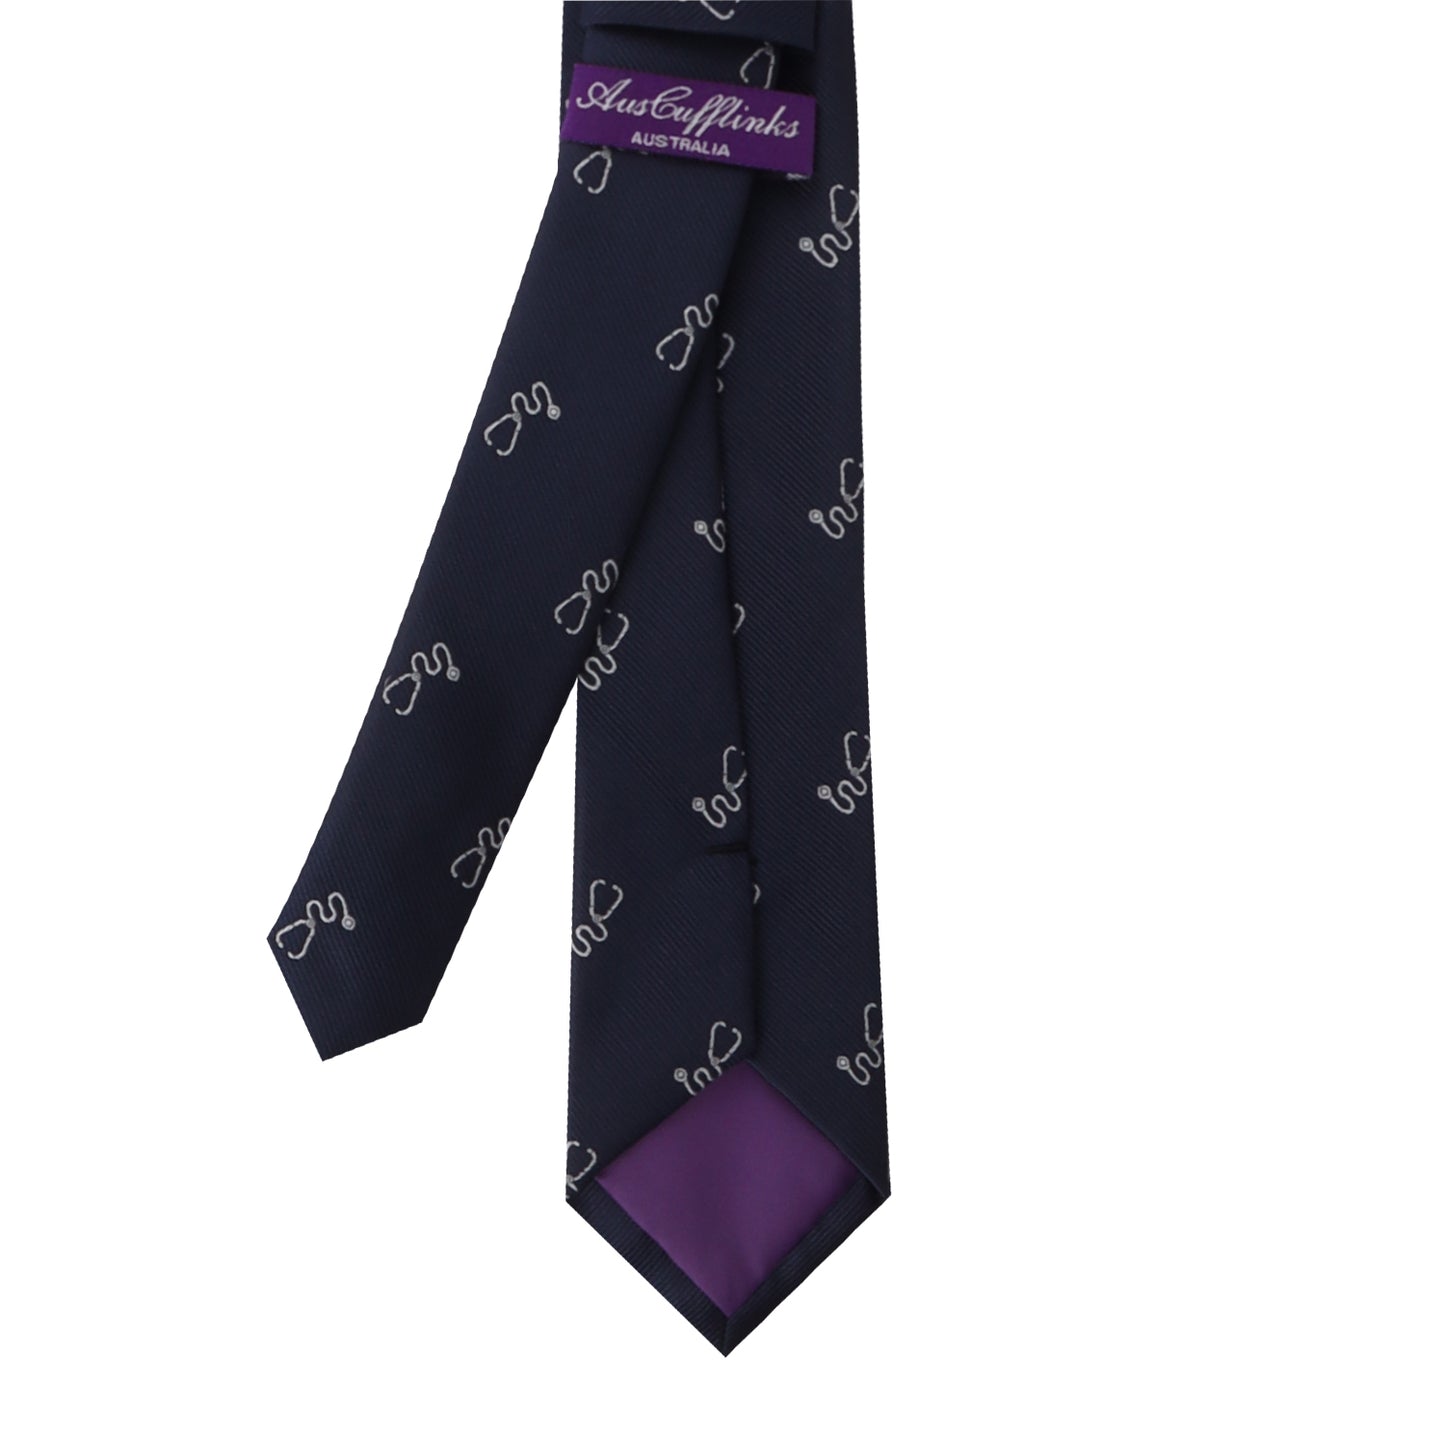 An extraordinary Stethoscope Skinny Tie with an anchor motif, perfect to wear and heal.